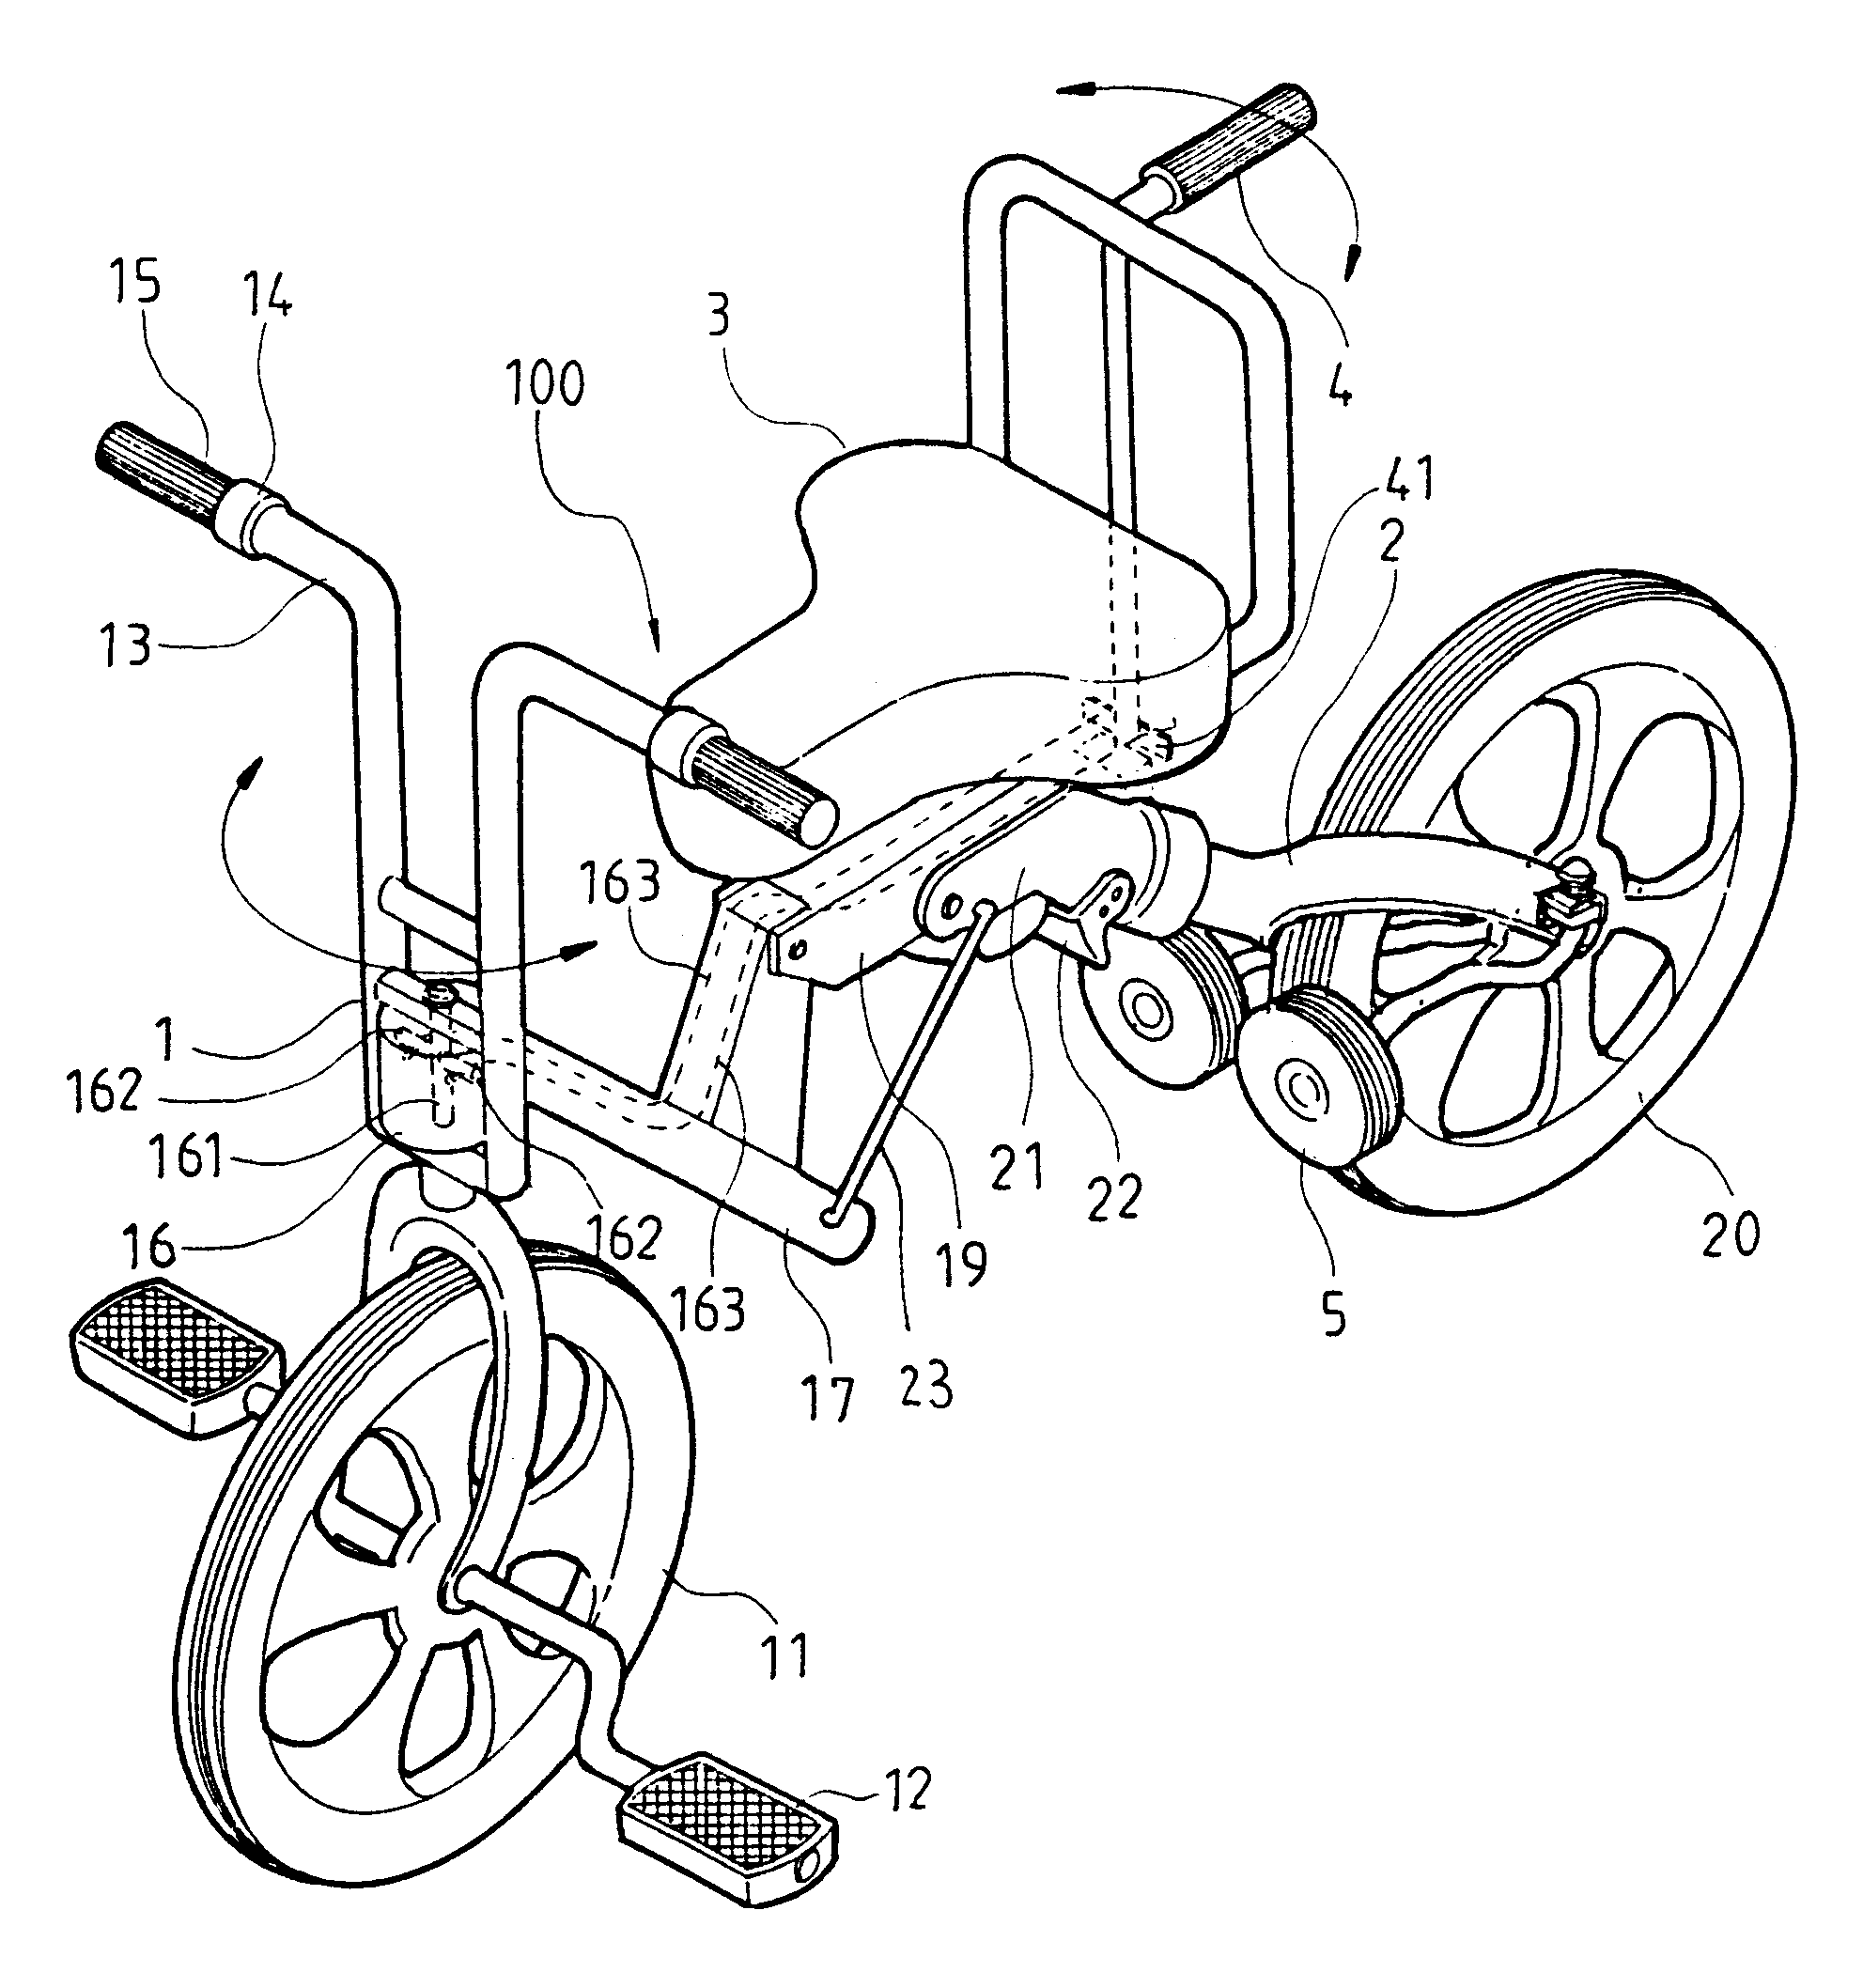 Structure of a bicycle for children